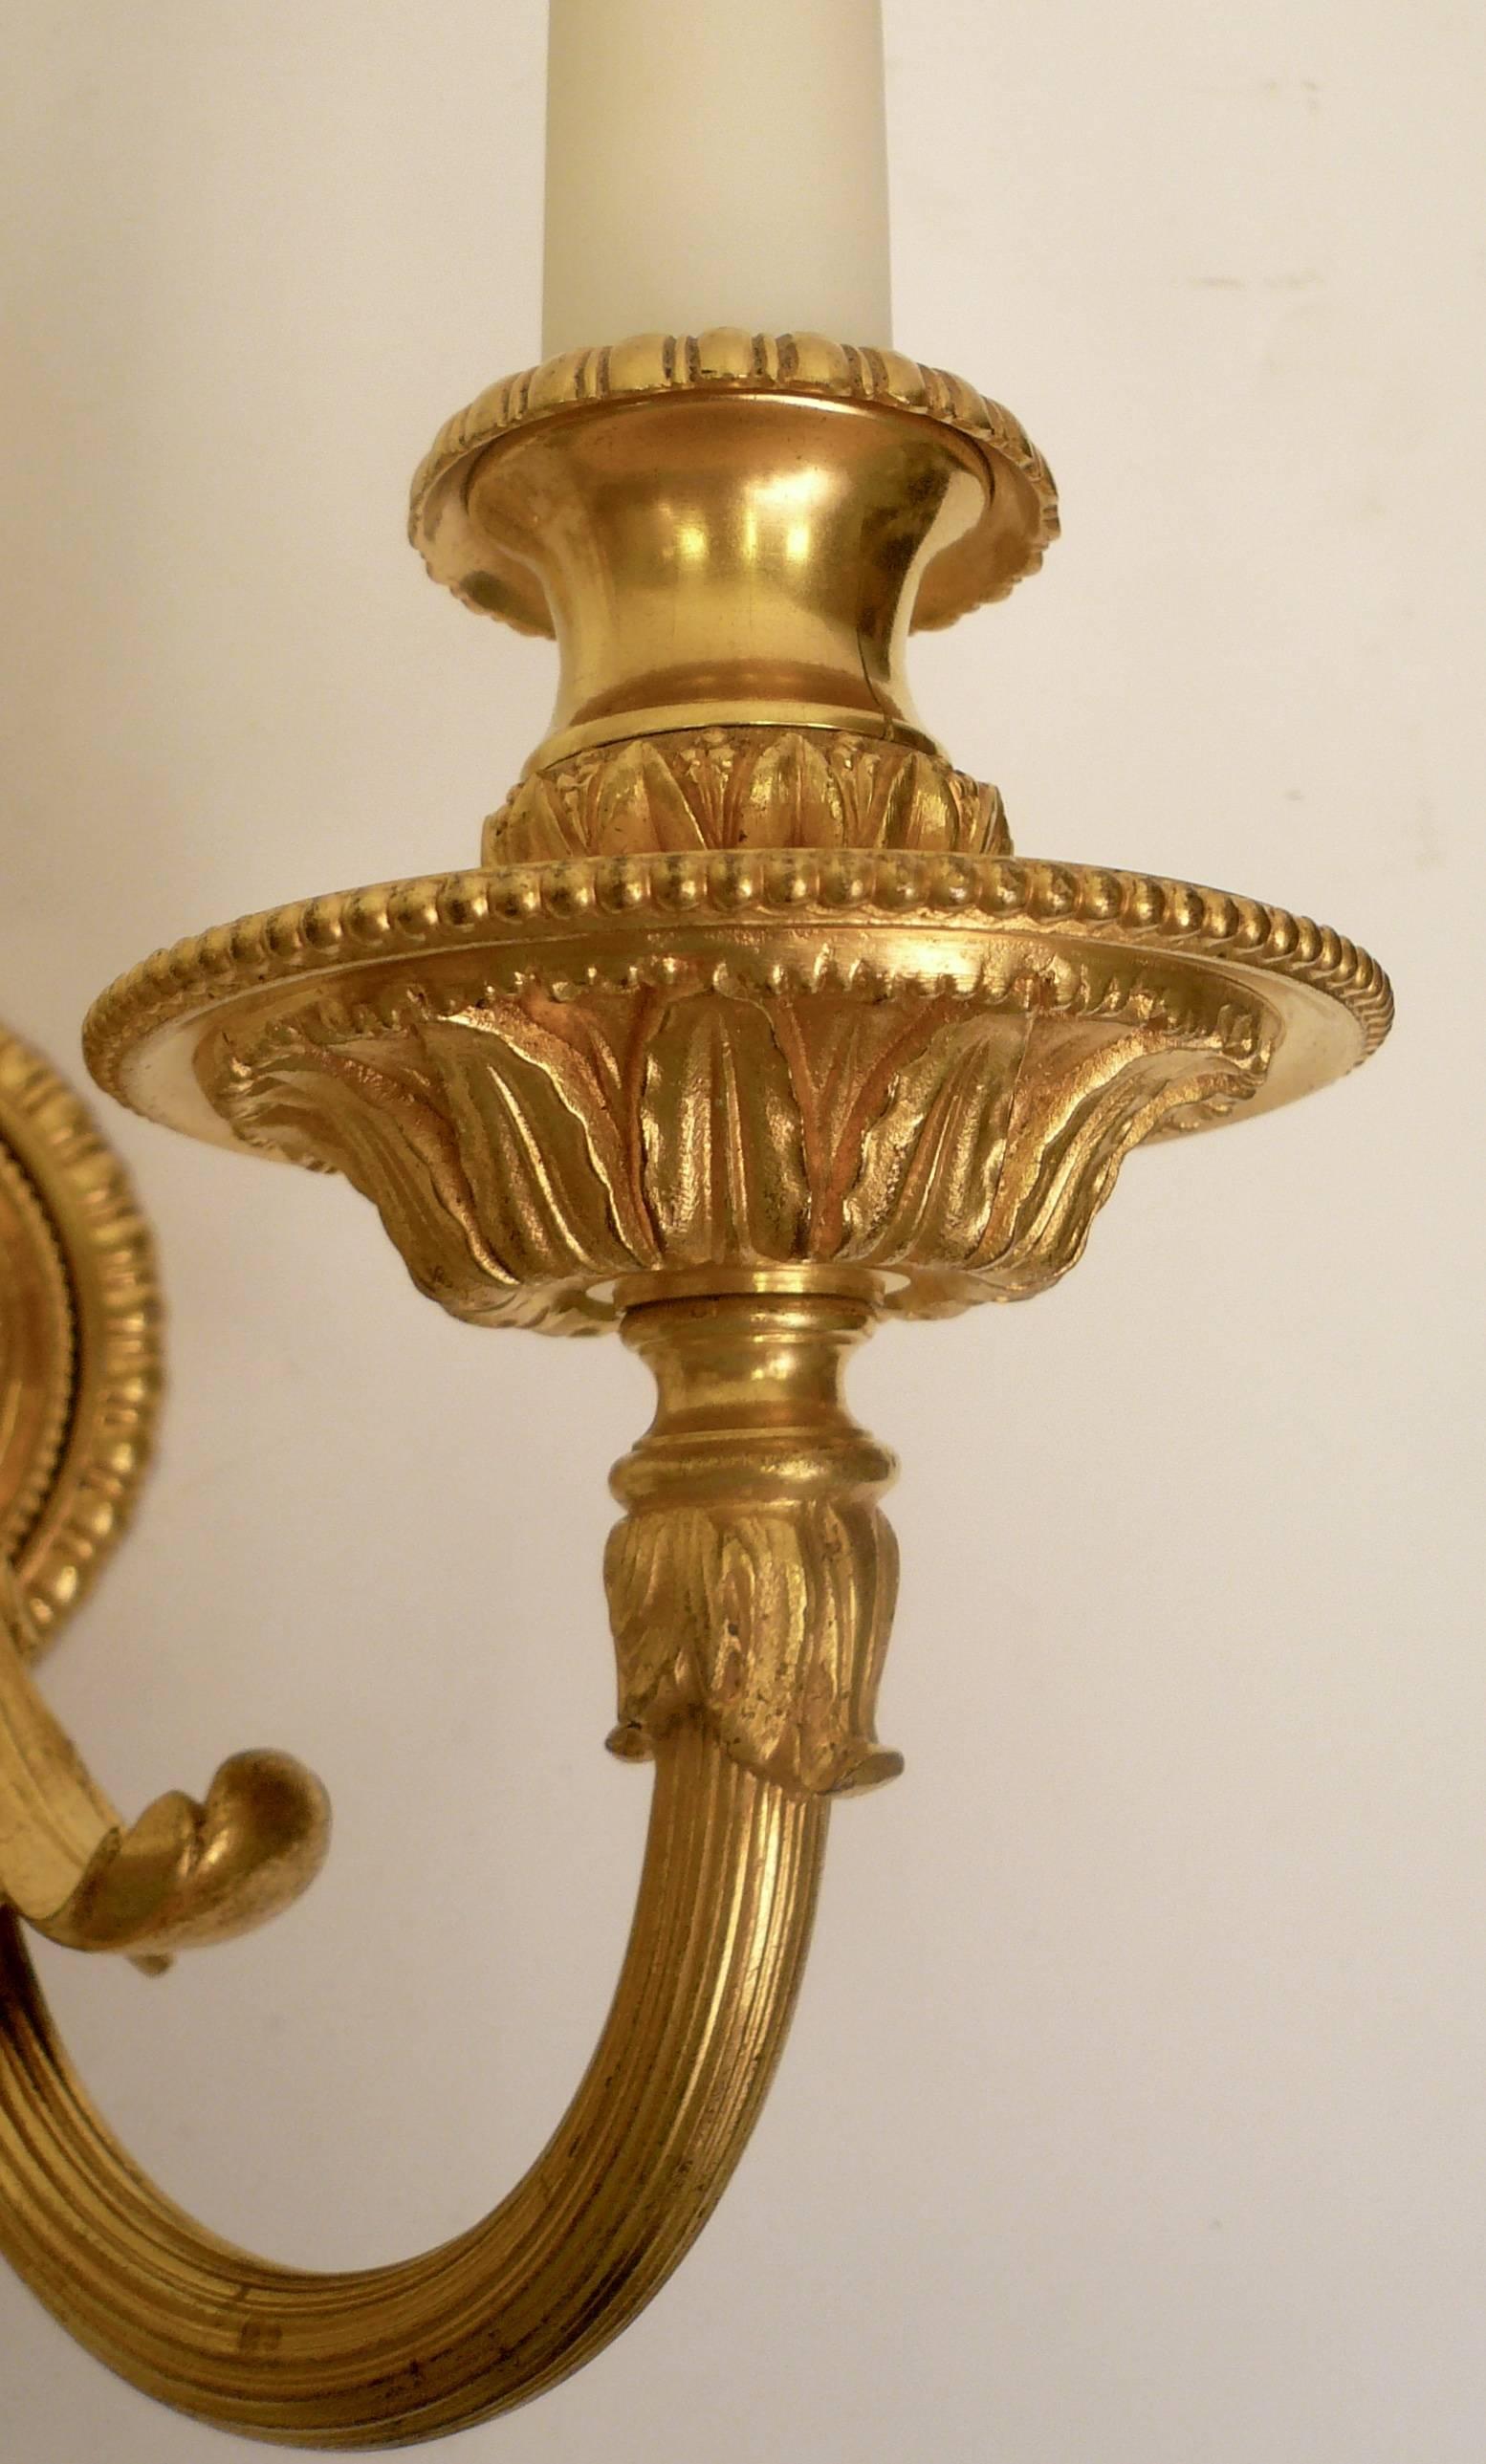 19th Century Pair of Neo-Cassical Gilt Bronze Three-Light Wall Sconces by E. F. Caldwell